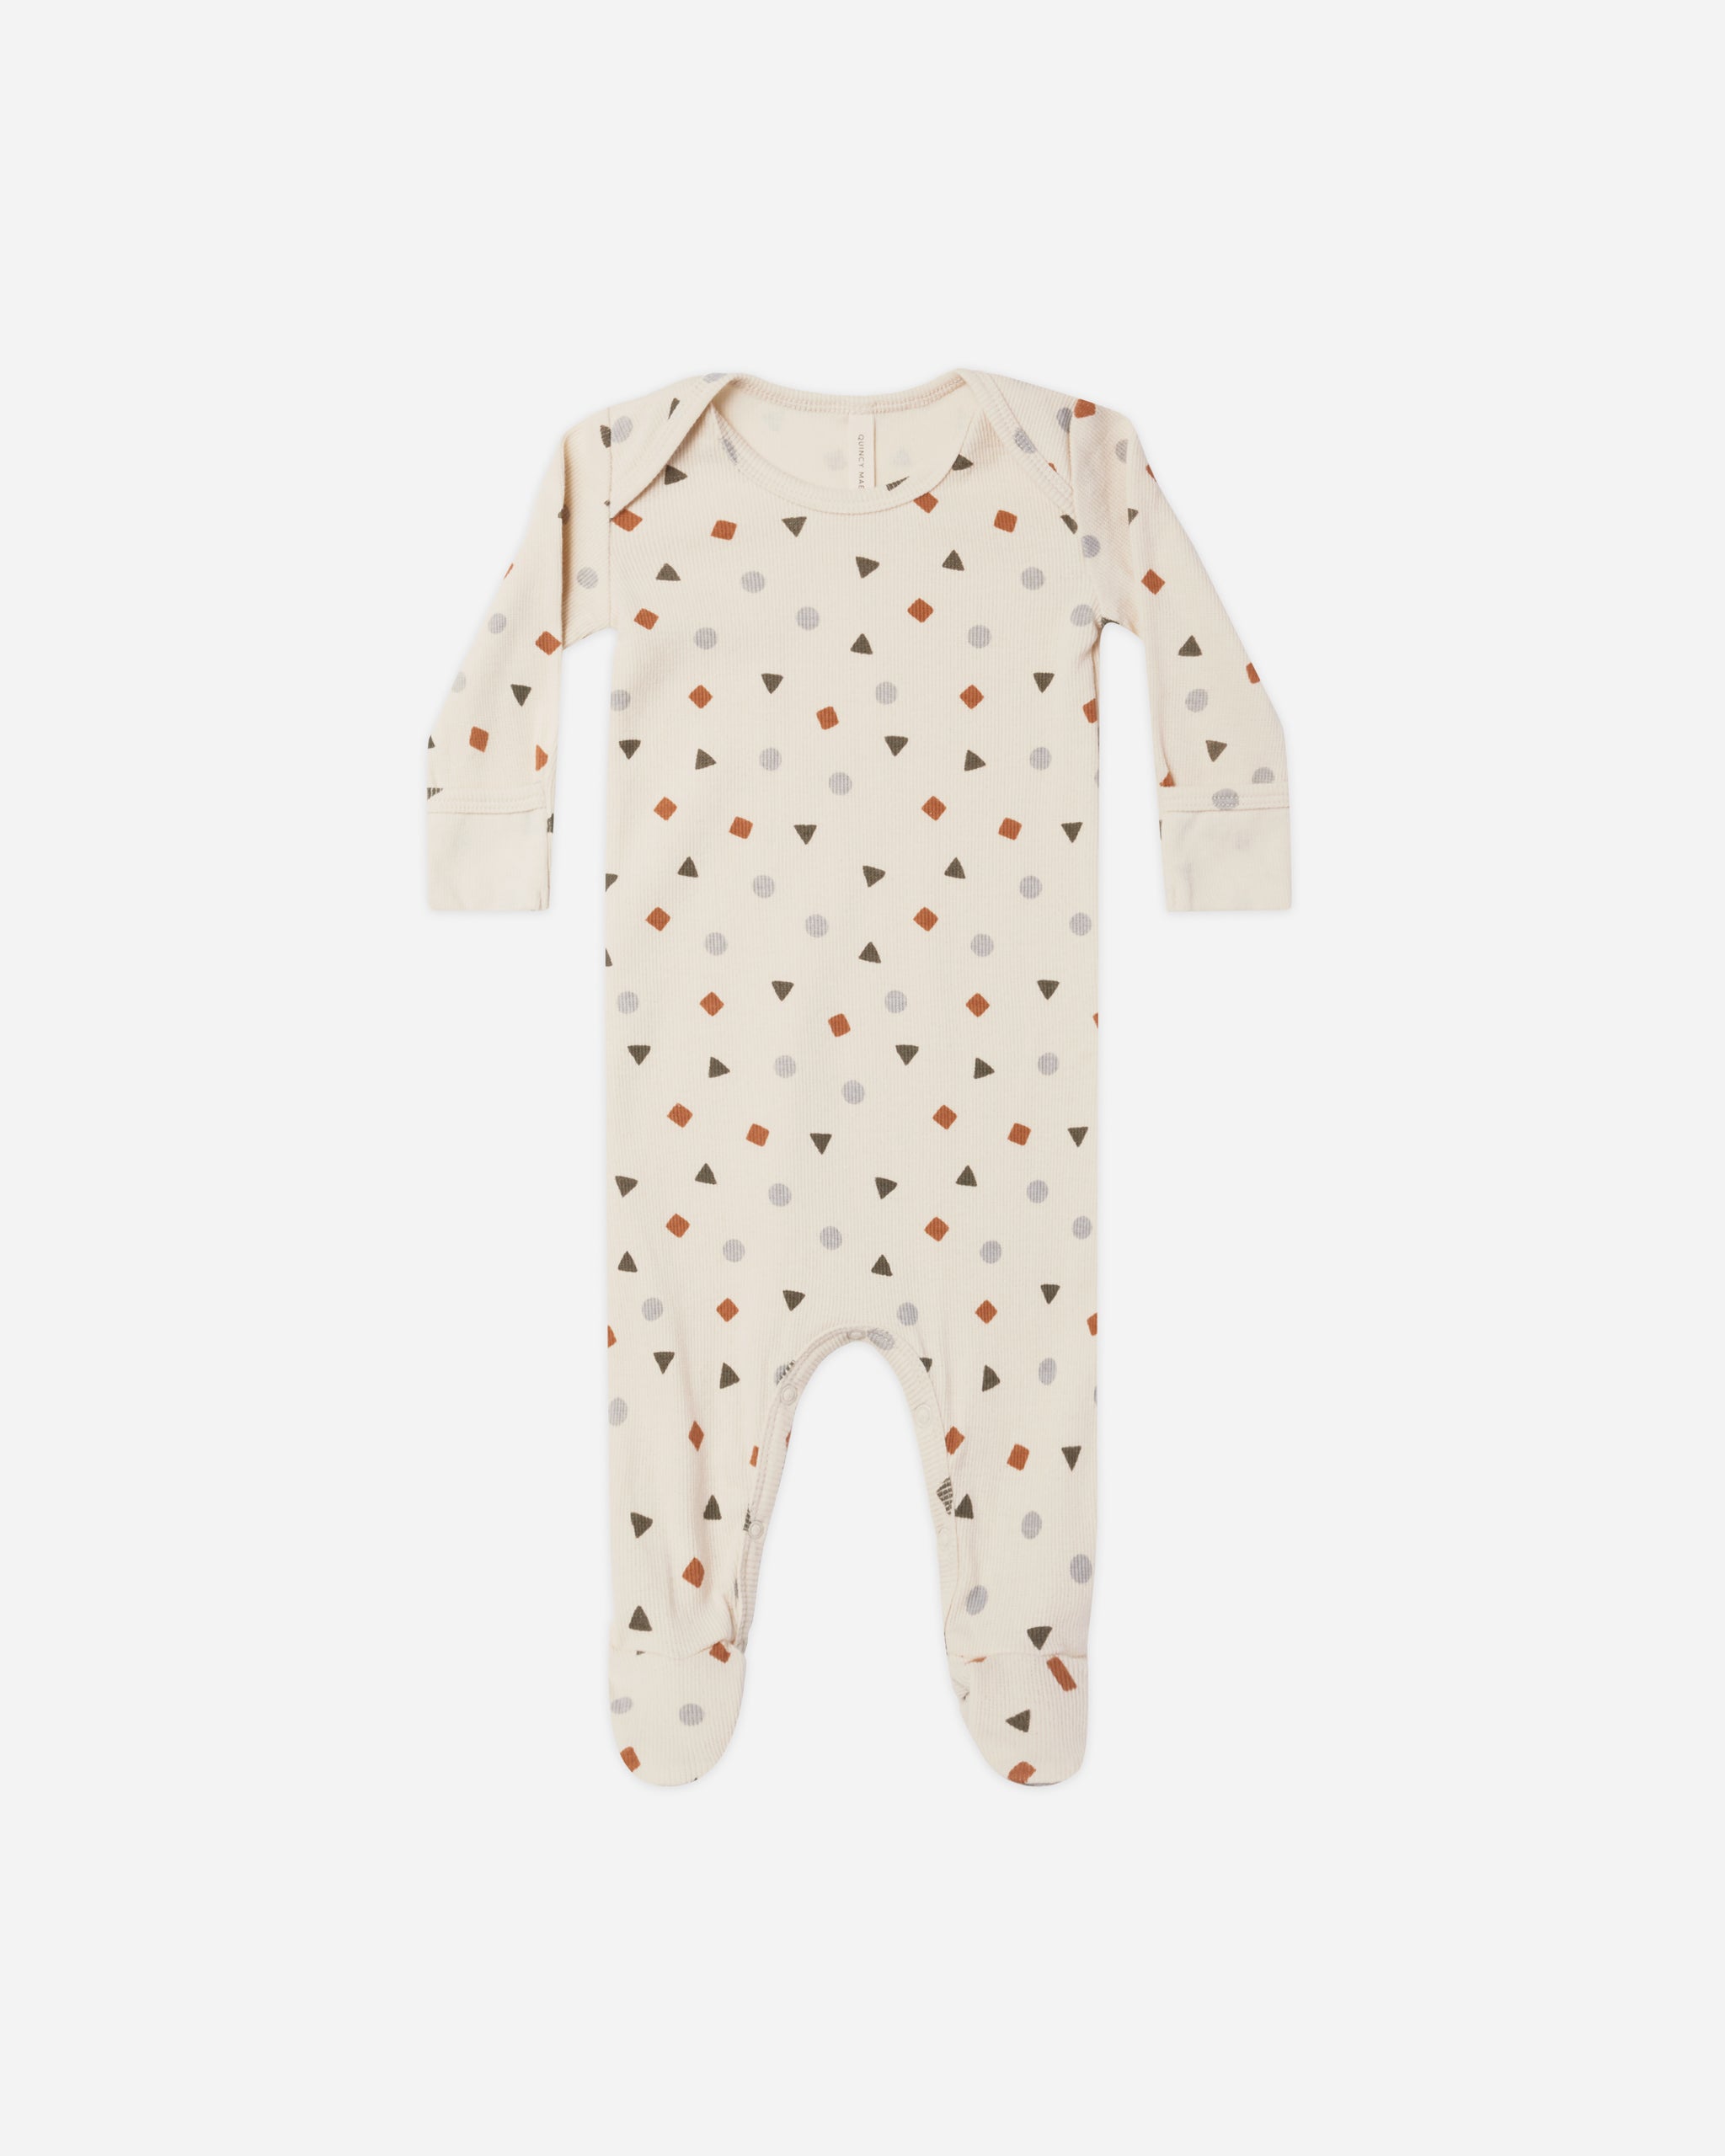 Ribbed Footie || Geo - Rylee + Cru | Kids Clothes | Trendy Baby Clothes | Modern Infant Outfits |